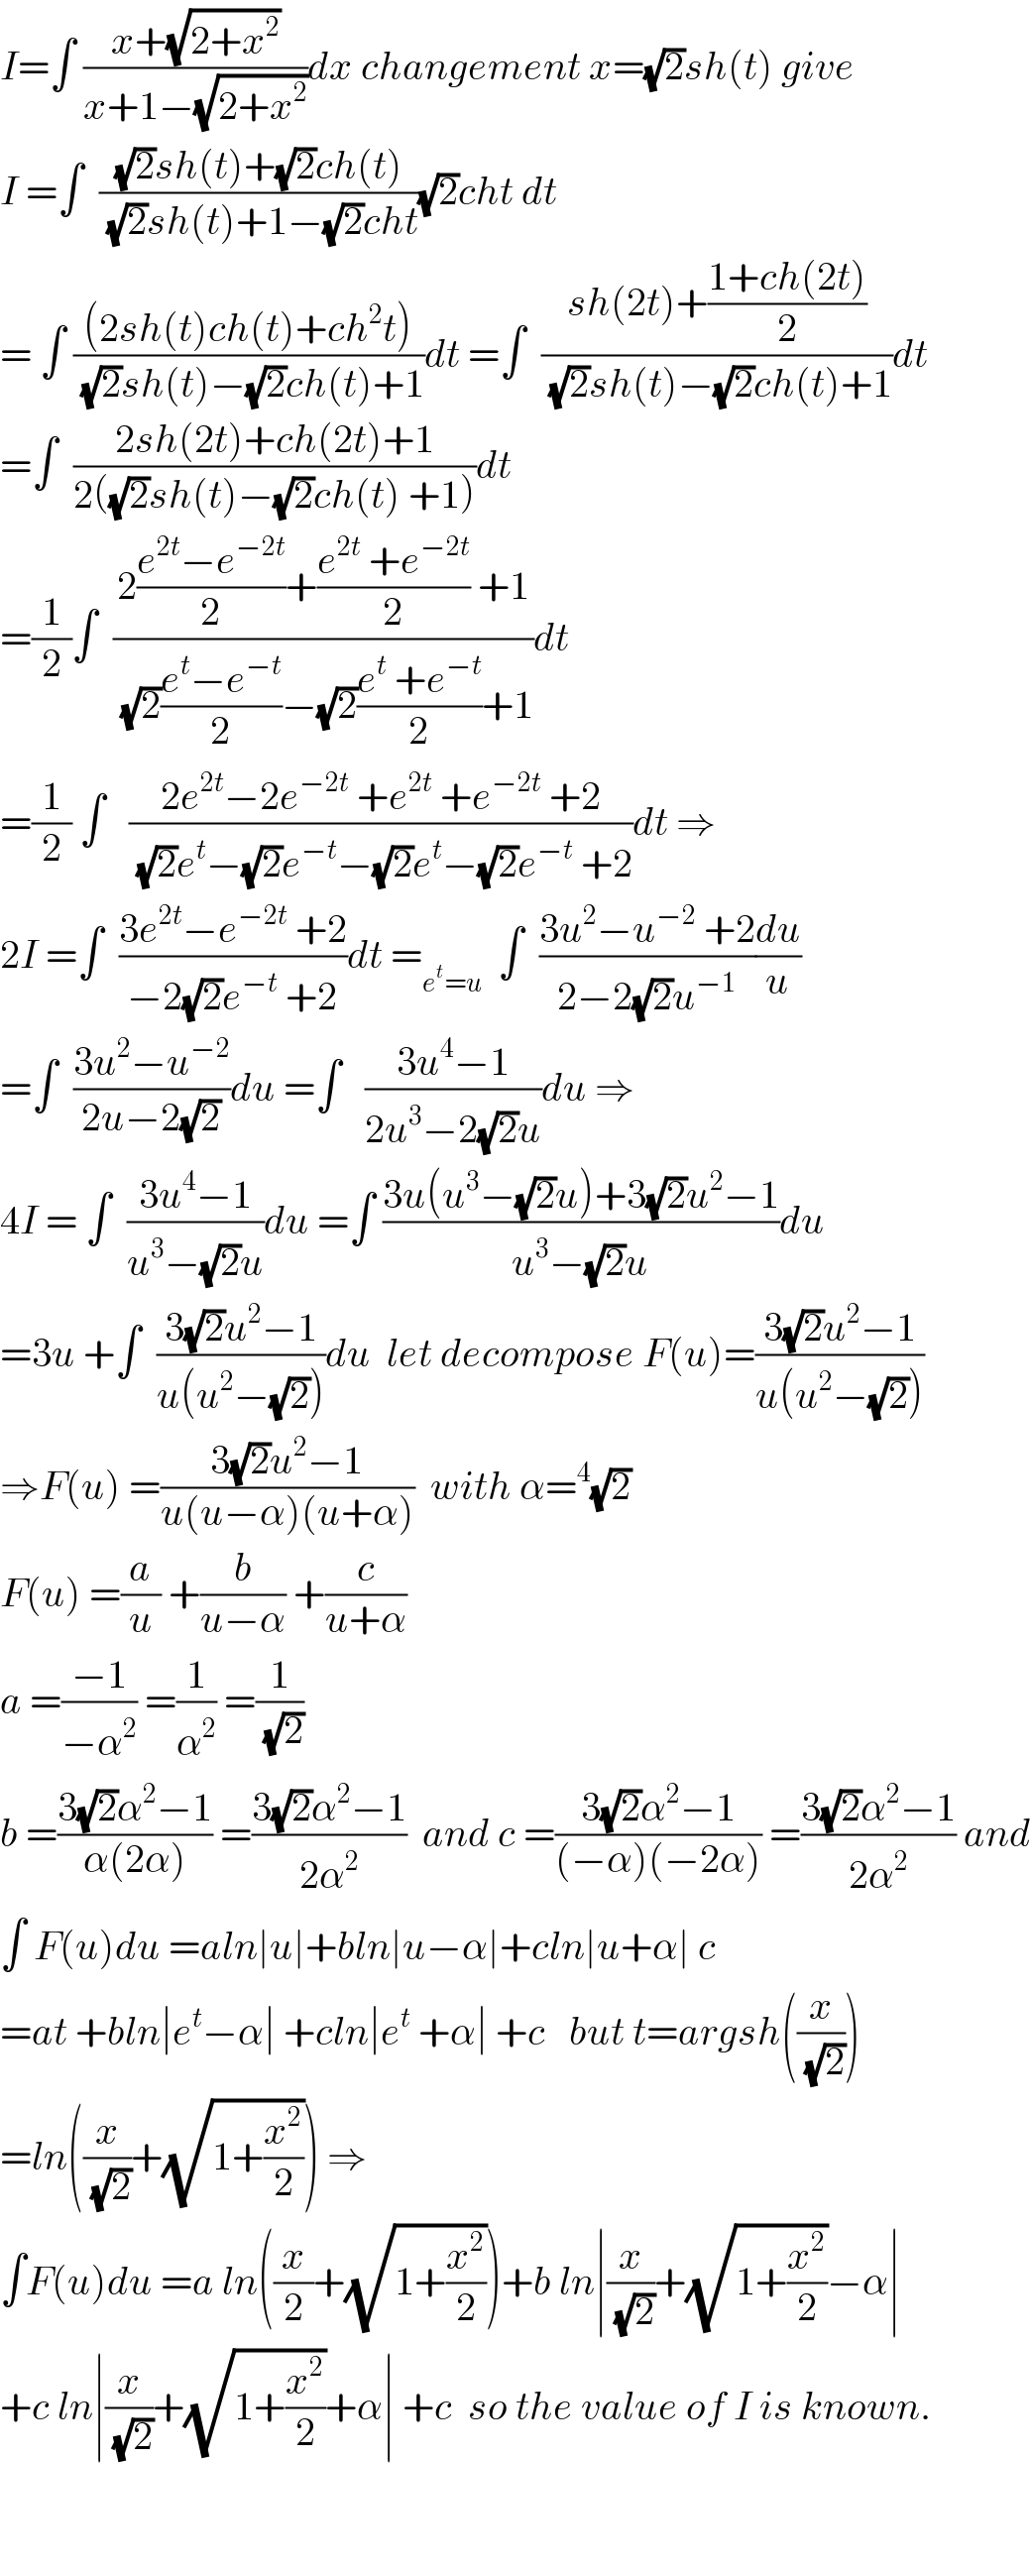 I=∫ ((x+(√(2+x^2 )))/(x+1−(√(2+x^2 ))))dx changement x=(√2)sh(t) give  I =∫  (((√2)sh(t)+(√2)ch(t))/((√2)sh(t)+1−(√2)cht))(√2)cht dt  = ∫ (((2sh(t)ch(t)+ch^2 t))/((√2)sh(t)−(√2)ch(t)+1))dt =∫  ((sh(2t)+((1+ch(2t))/2))/((√2)sh(t)−(√2)ch(t)+1))dt  =∫  ((2sh(2t)+ch(2t)+1)/(2((√2)sh(t)−(√2)ch(t) +1)))dt  =(1/2)∫  ((2((e^(2t) −e^(−2t) )/2)+((e^(2t)  +e^(−2t) )/2) +1)/((√2)((e^t −e^(−t) )/2)−(√2)((e^t  +e^(−t) )/2)+1))dt  =(1/2) ∫   ((2e^(2t) −2e^(−2t)  +e^(2t)  +e^(−2t)  +2)/((√2)e^t −(√2)e^(−t) −(√2)e^t −(√2)e^(−t)  +2))dt ⇒  2I =∫  ((3e^(2t) −e^(−2t)  +2)/(−2(√2)e^(−t)  +2))dt =_(e^t =u)   ∫  ((3u^2 −u^(−2)  +2)/(2−2(√2)u^(−1) ))(du/u)  =∫  ((3u^2 −u^(−2) )/(2u−2(√2)))du =∫   ((3u^4 −1)/(2u^3 −2(√2)u))du ⇒  4I = ∫  ((3u^4 −1)/(u^3 −(√2)u))du =∫ ((3u(u^3 −(√2)u)+3(√2)u^2 −1)/(u^3 −(√2)u))du  =3u +∫  ((3(√2)u^2 −1)/(u(u^2 −(√2))))du  let decompose F(u)=((3(√2)u^2 −1)/(u(u^2 −(√2))))  ⇒F(u) =((3(√2)u^2 −1)/(u(u−α)(u+α)))  with α=^4 (√2)  F(u) =(a/u) +(b/(u−α)) +(c/(u+α))  a =((−1)/(−α^2 )) =(1/α^2 ) =(1/(√2))  b =((3(√2)α^2 −1)/(α(2α))) =((3(√2)α^2 −1)/(2α^2 ))  and c =((3(√2)α^2 −1)/((−α)(−2α))) =((3(√2)α^2 −1)/(2α^2 )) and  ∫ F(u)du =aln∣u∣+bln∣u−α∣+cln∣u+α∣ c  =at +bln∣e^t −α∣ +cln∣e^t  +α∣ +c   but t=argsh((x/(√2)))  =ln((x/(√2))+(√(1+(x^2 /2)))) ⇒  ∫F(u)du =a ln((x/2)+(√(1+(x^2 /2))))+b ln∣(x/(√2))+(√(1+(x^2 /2)))−α∣  +c ln∣(x/(√2))+(√(1+(x^2 /2)))+α∣ +c  so the value of I is known.      